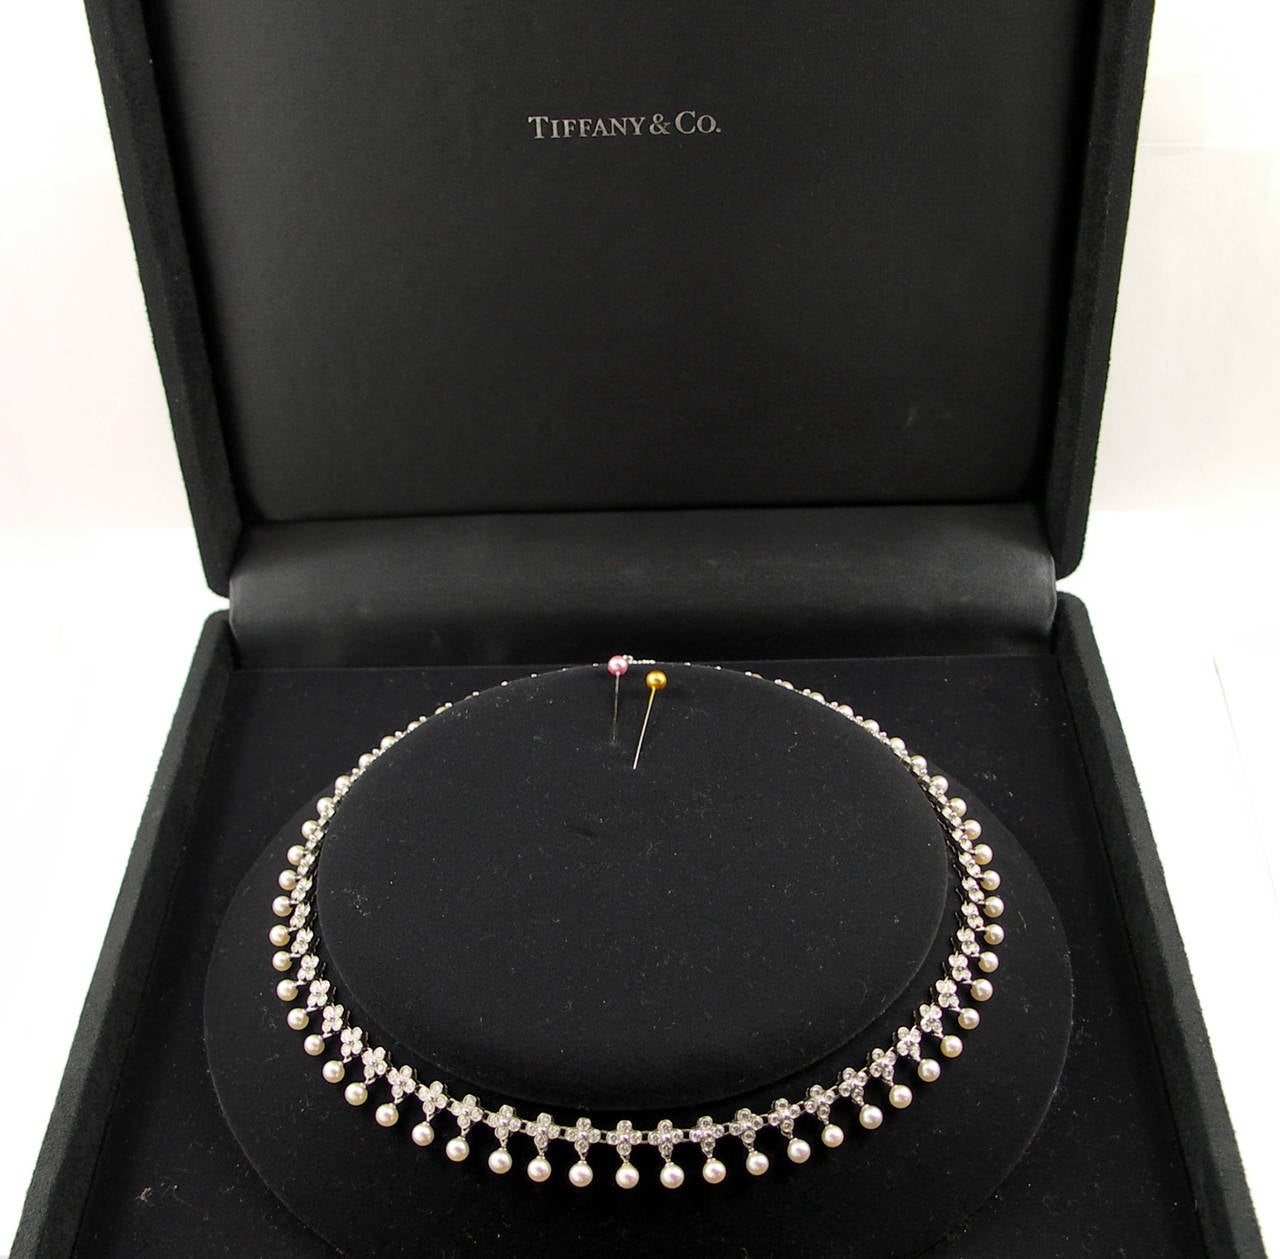 Women's Tiffany & Co. Lace Necklace in Platinum with Diamonds and Pearls